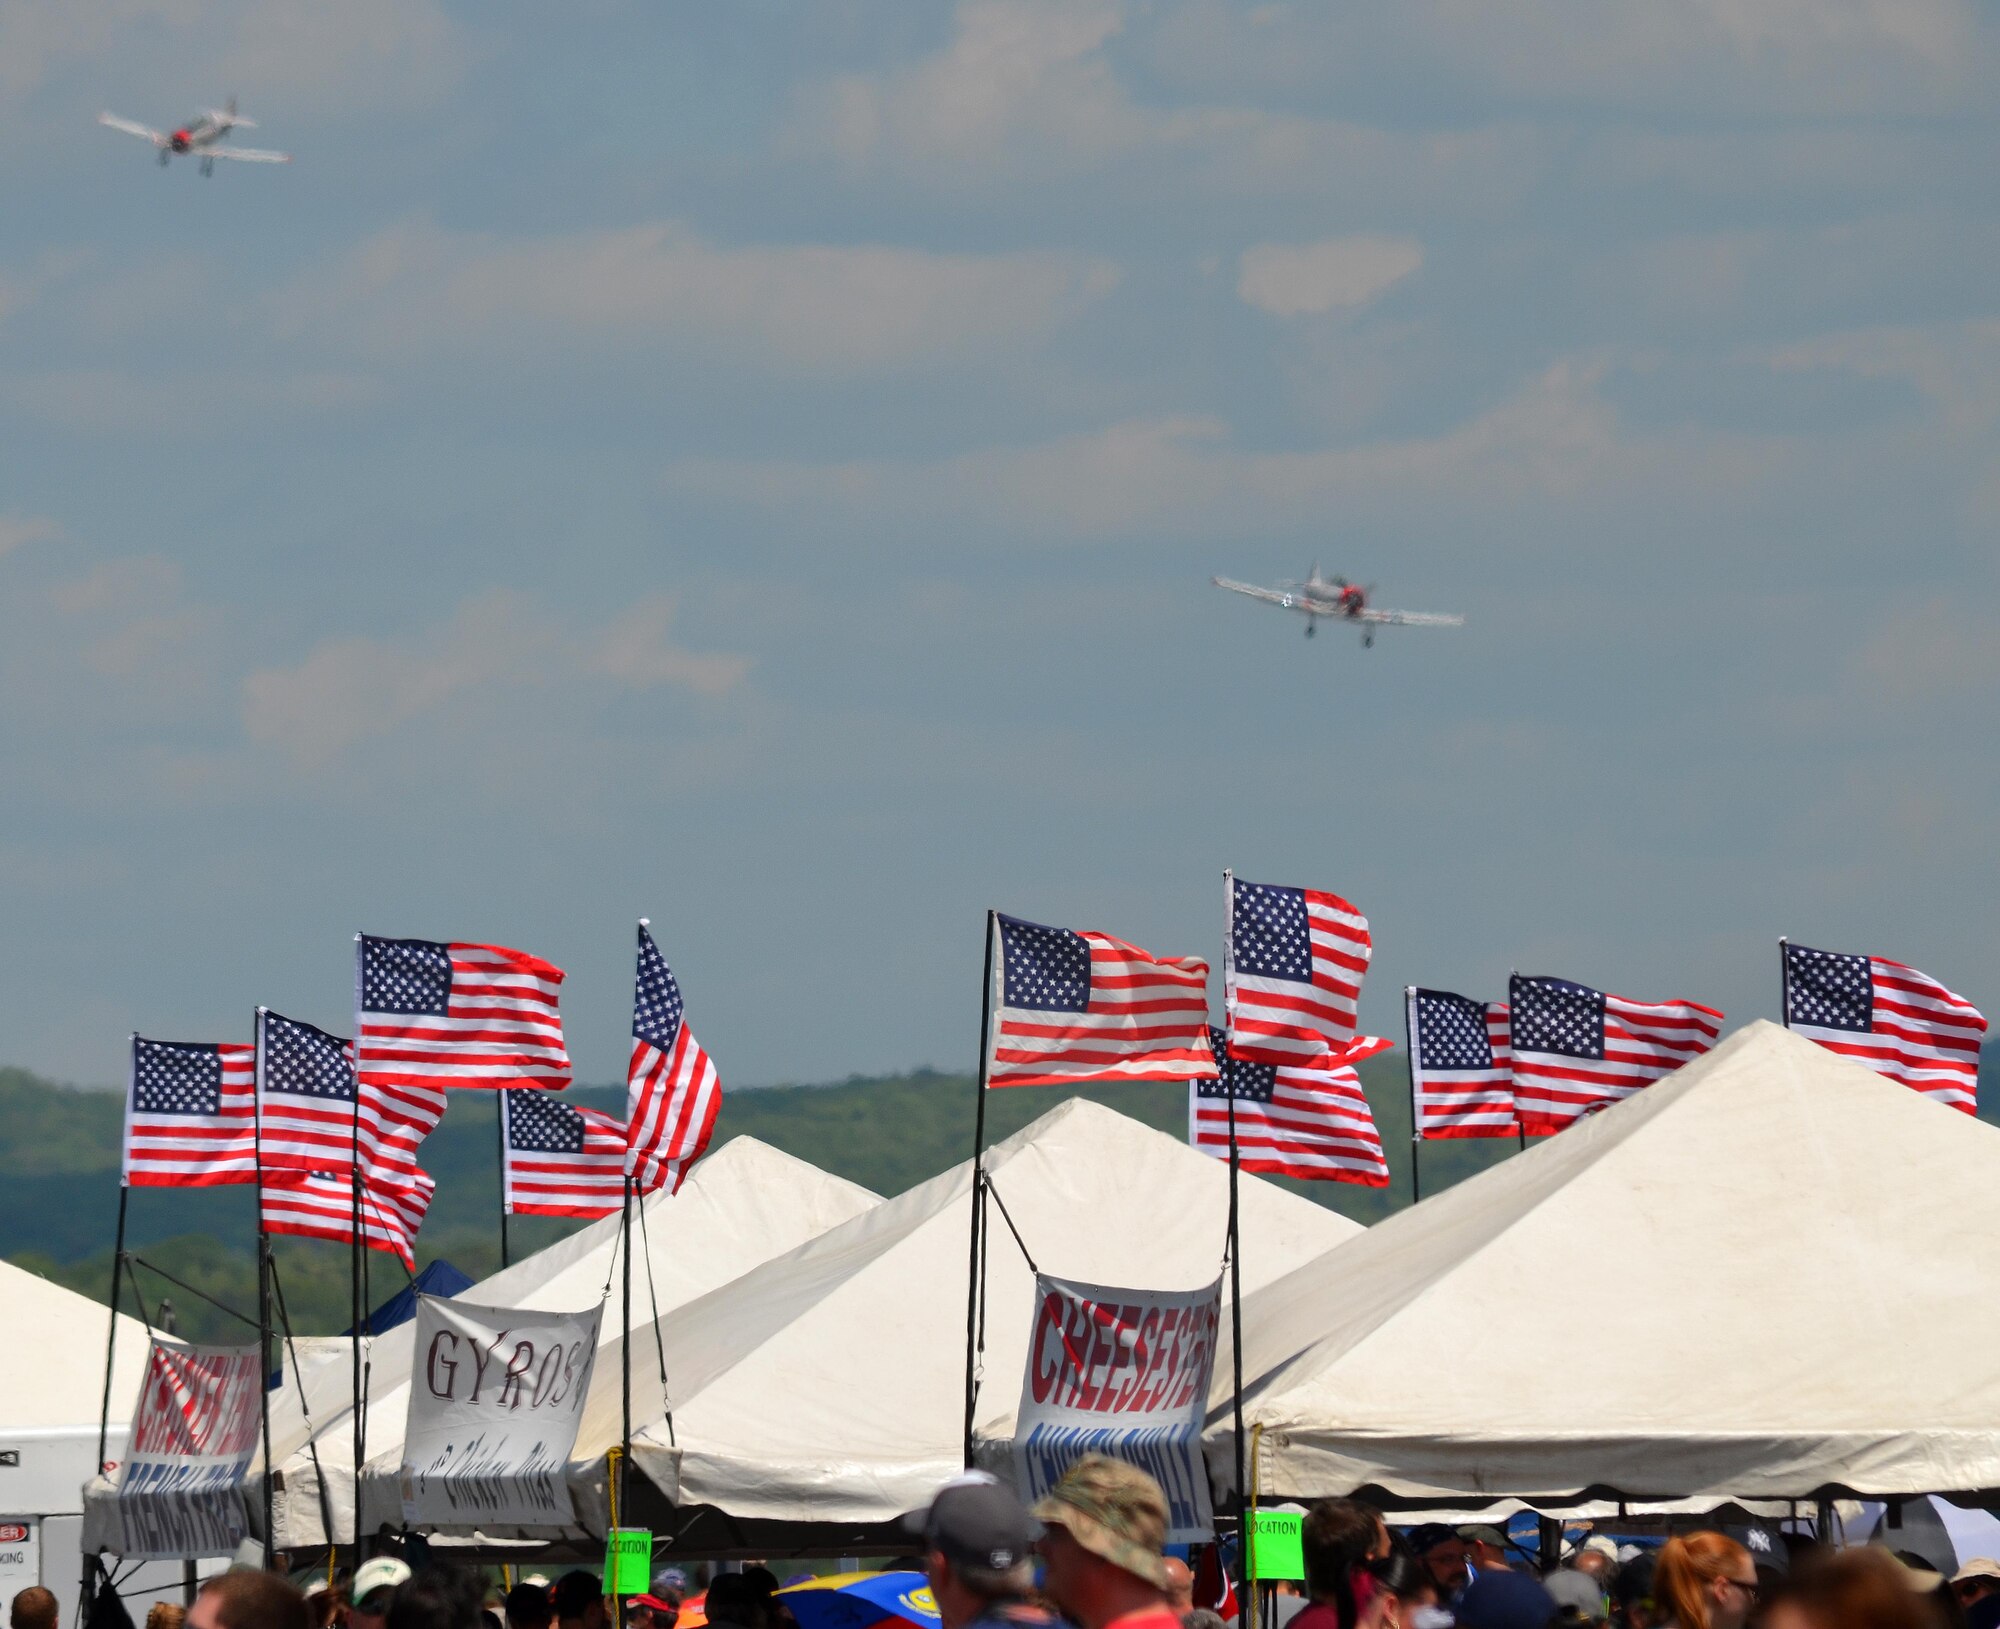 Nearly 400,000 spectators came to Westover Air Reserve Base to watch the 2015 Great New England Air Show, boasting more than two dozen current and vintage military aircraft. Aerial demonstration teams included the U.S. Navy Blue Angels, Canadian Snowbirds, U.S. Army’s Golden Knights parachuting team, F-22 demo team, Geico Skytypers, and Canadian CF-18 team. (U.S. Air Force photo/SSgt. Kelly Goonan)